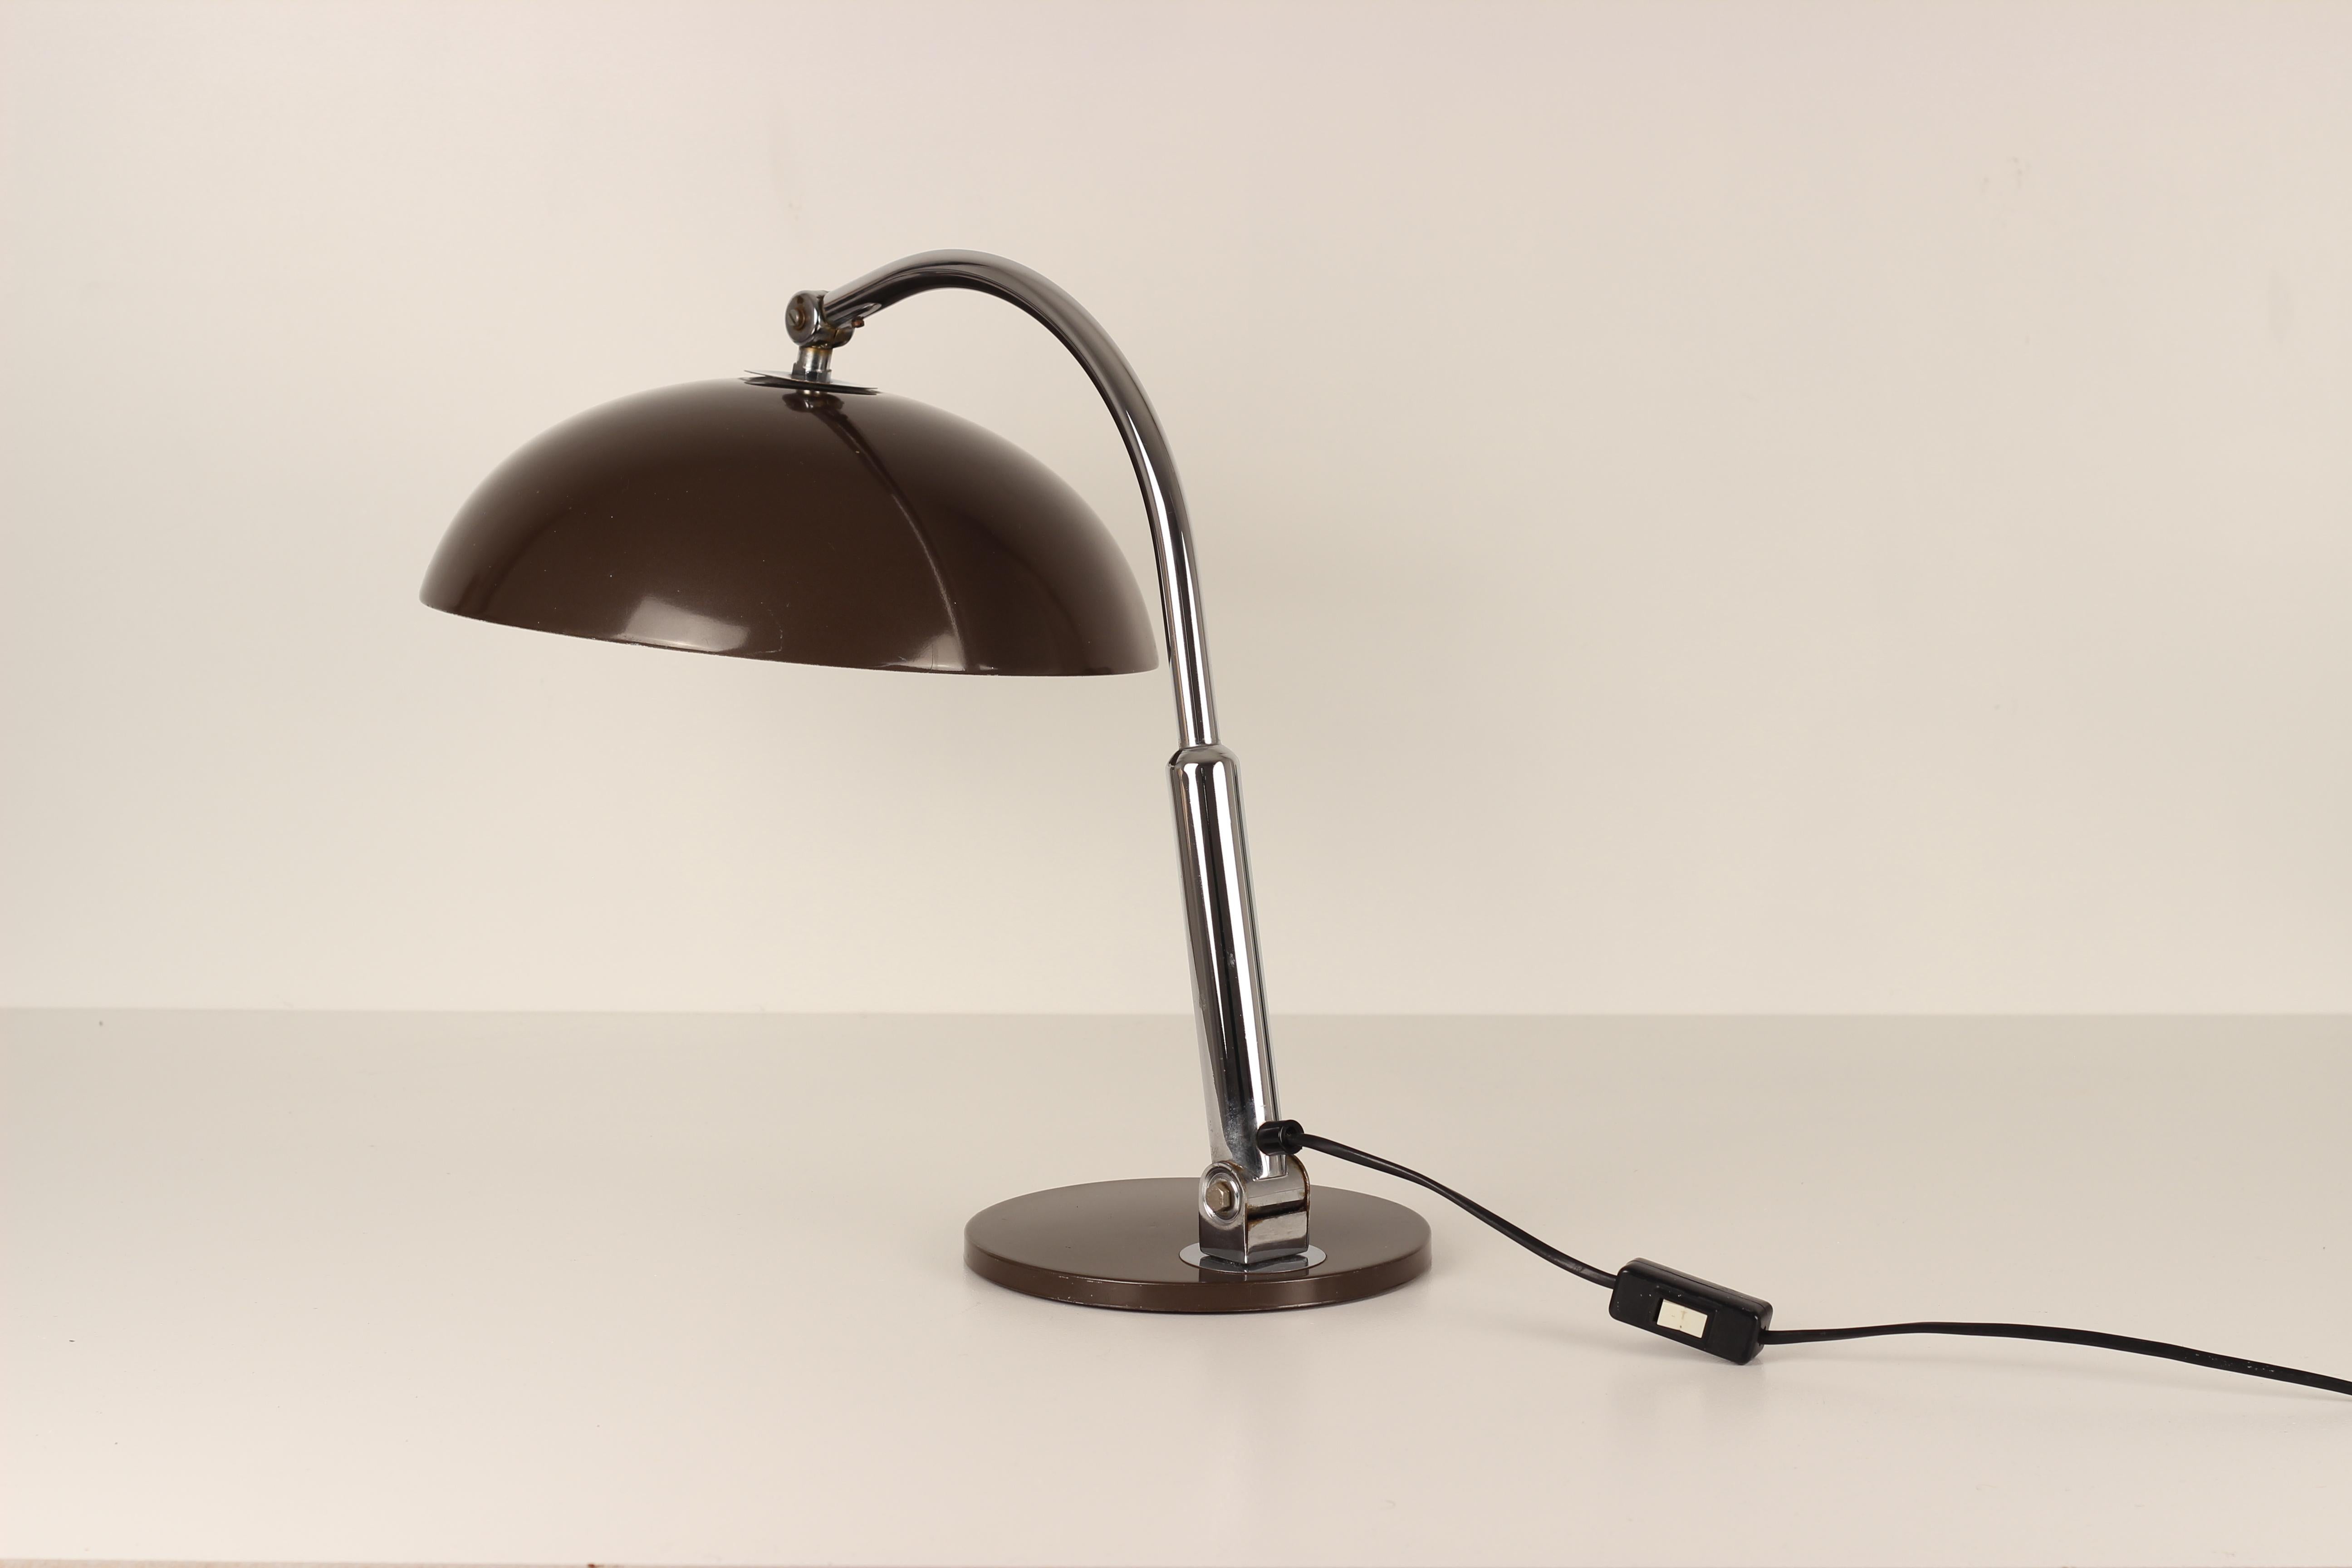 Mid-20th Century Hala Zeist Desk Lamp in the Bauhaus Style Designed, 1930’s-1960’s For Sale